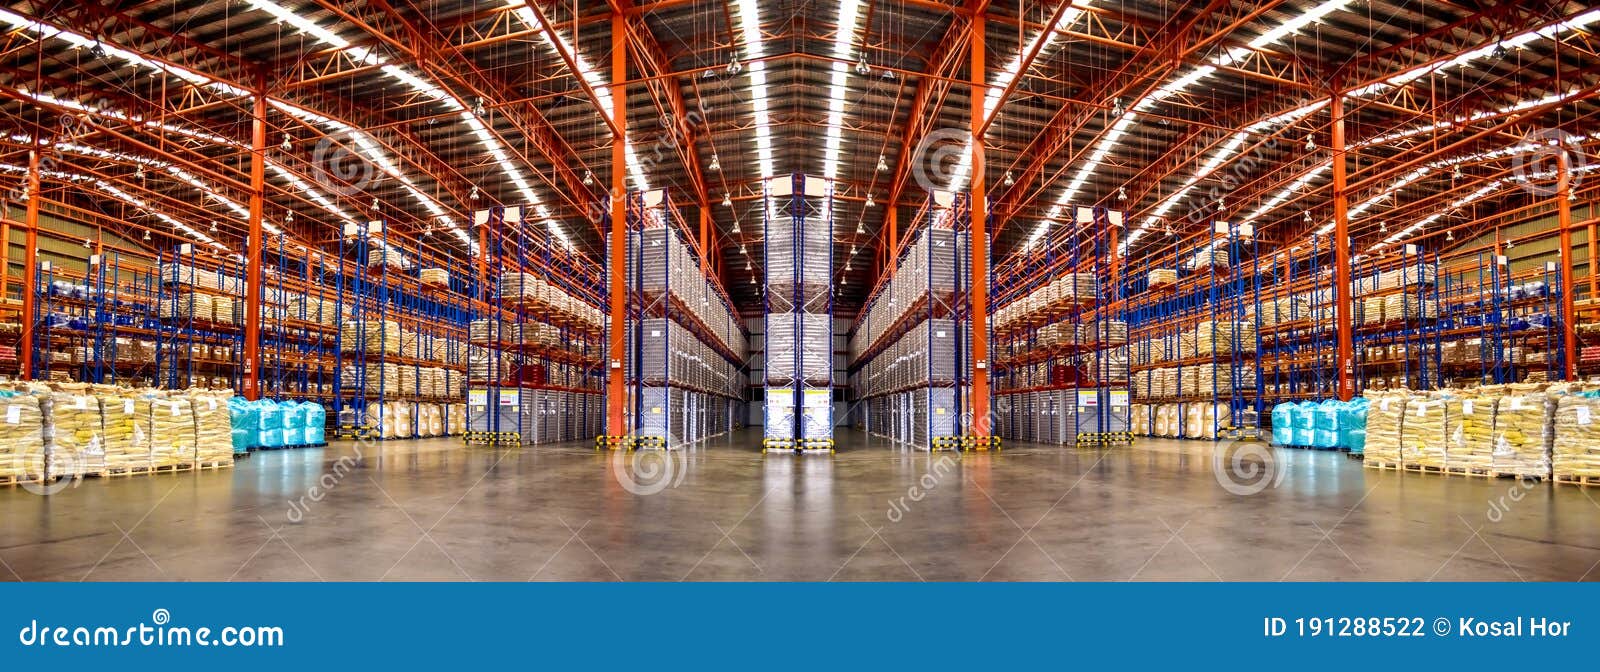 warehouse industrial and logistics companies. commercial warehouse. huge distribution warehouse with high shelves.